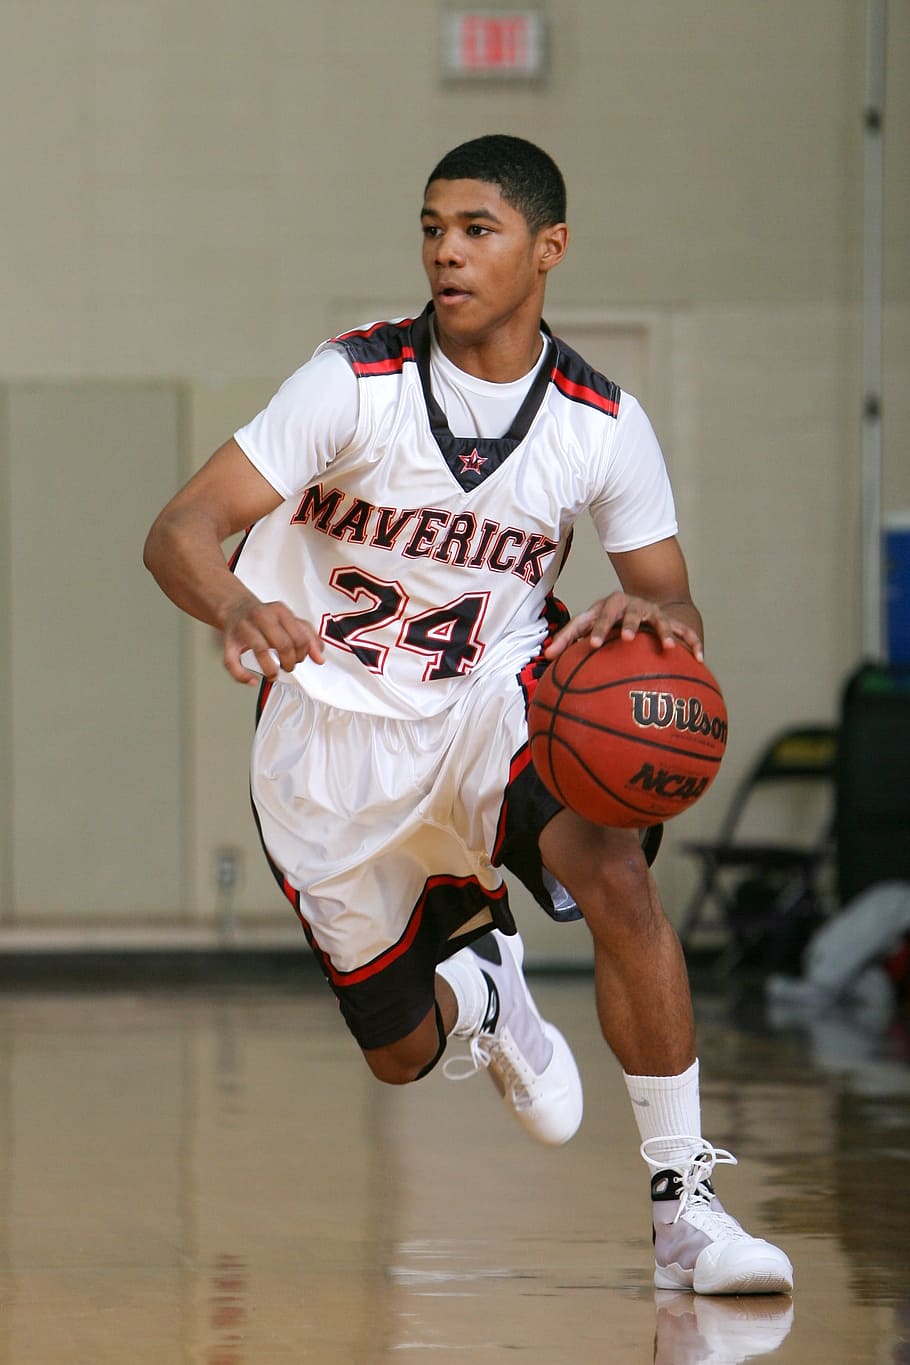 man playing basketball, player, game, sport, athlete, competition